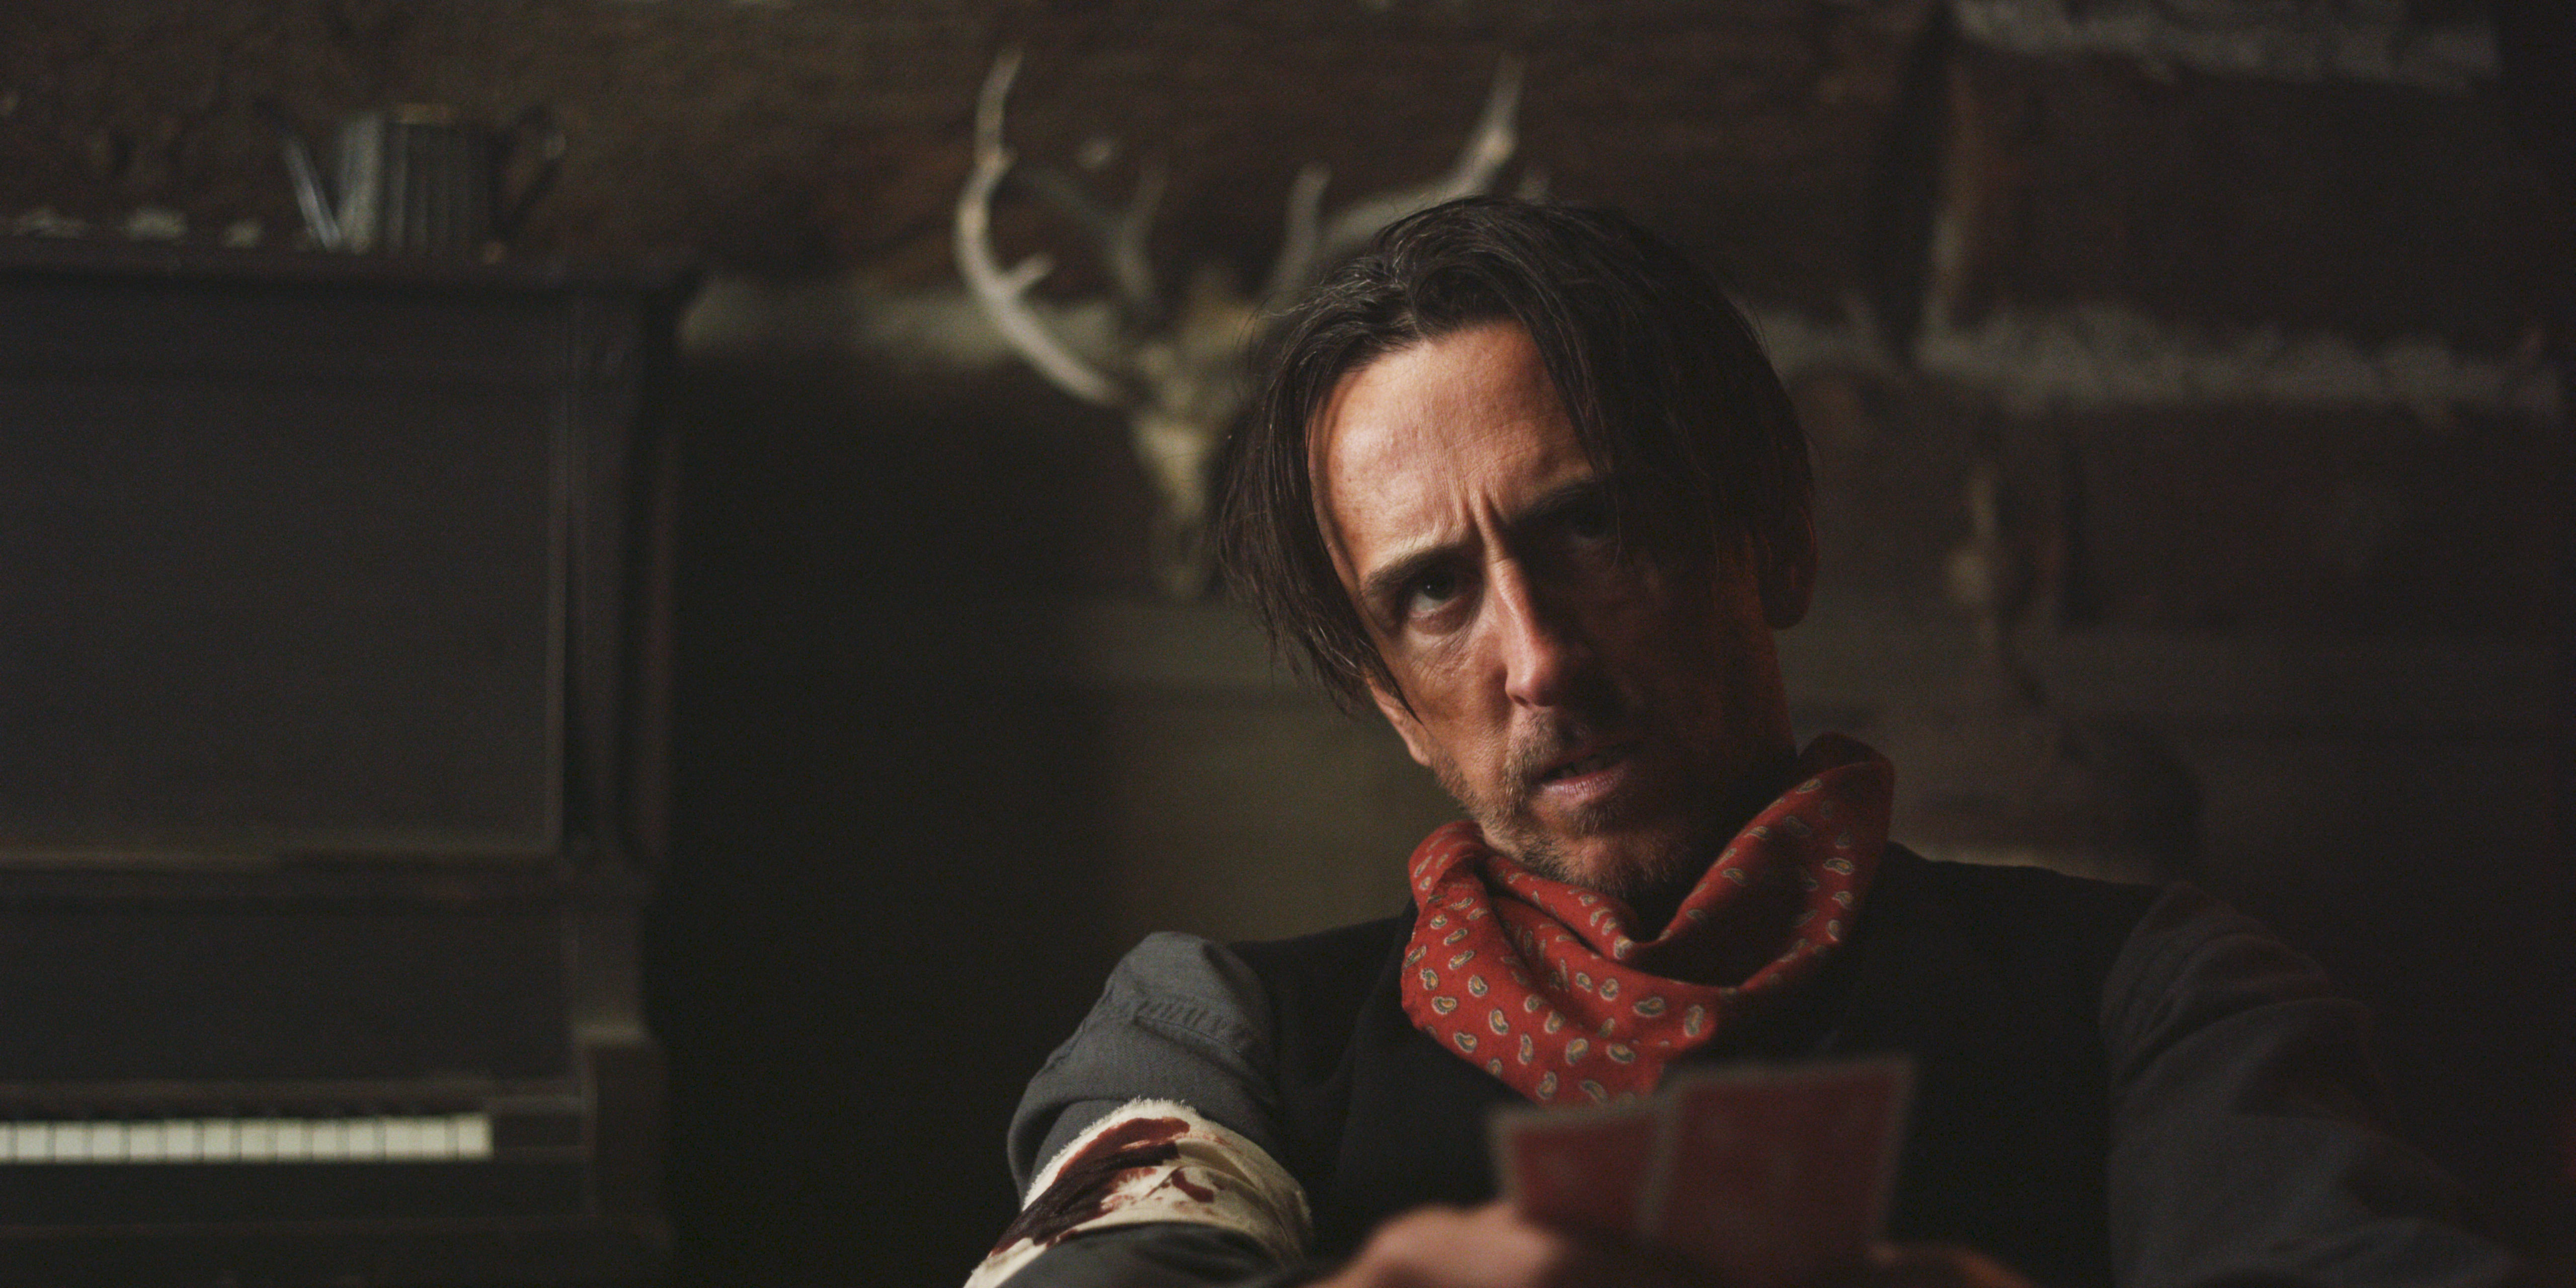 as Don Calliway in BILLY THE KID (2014)